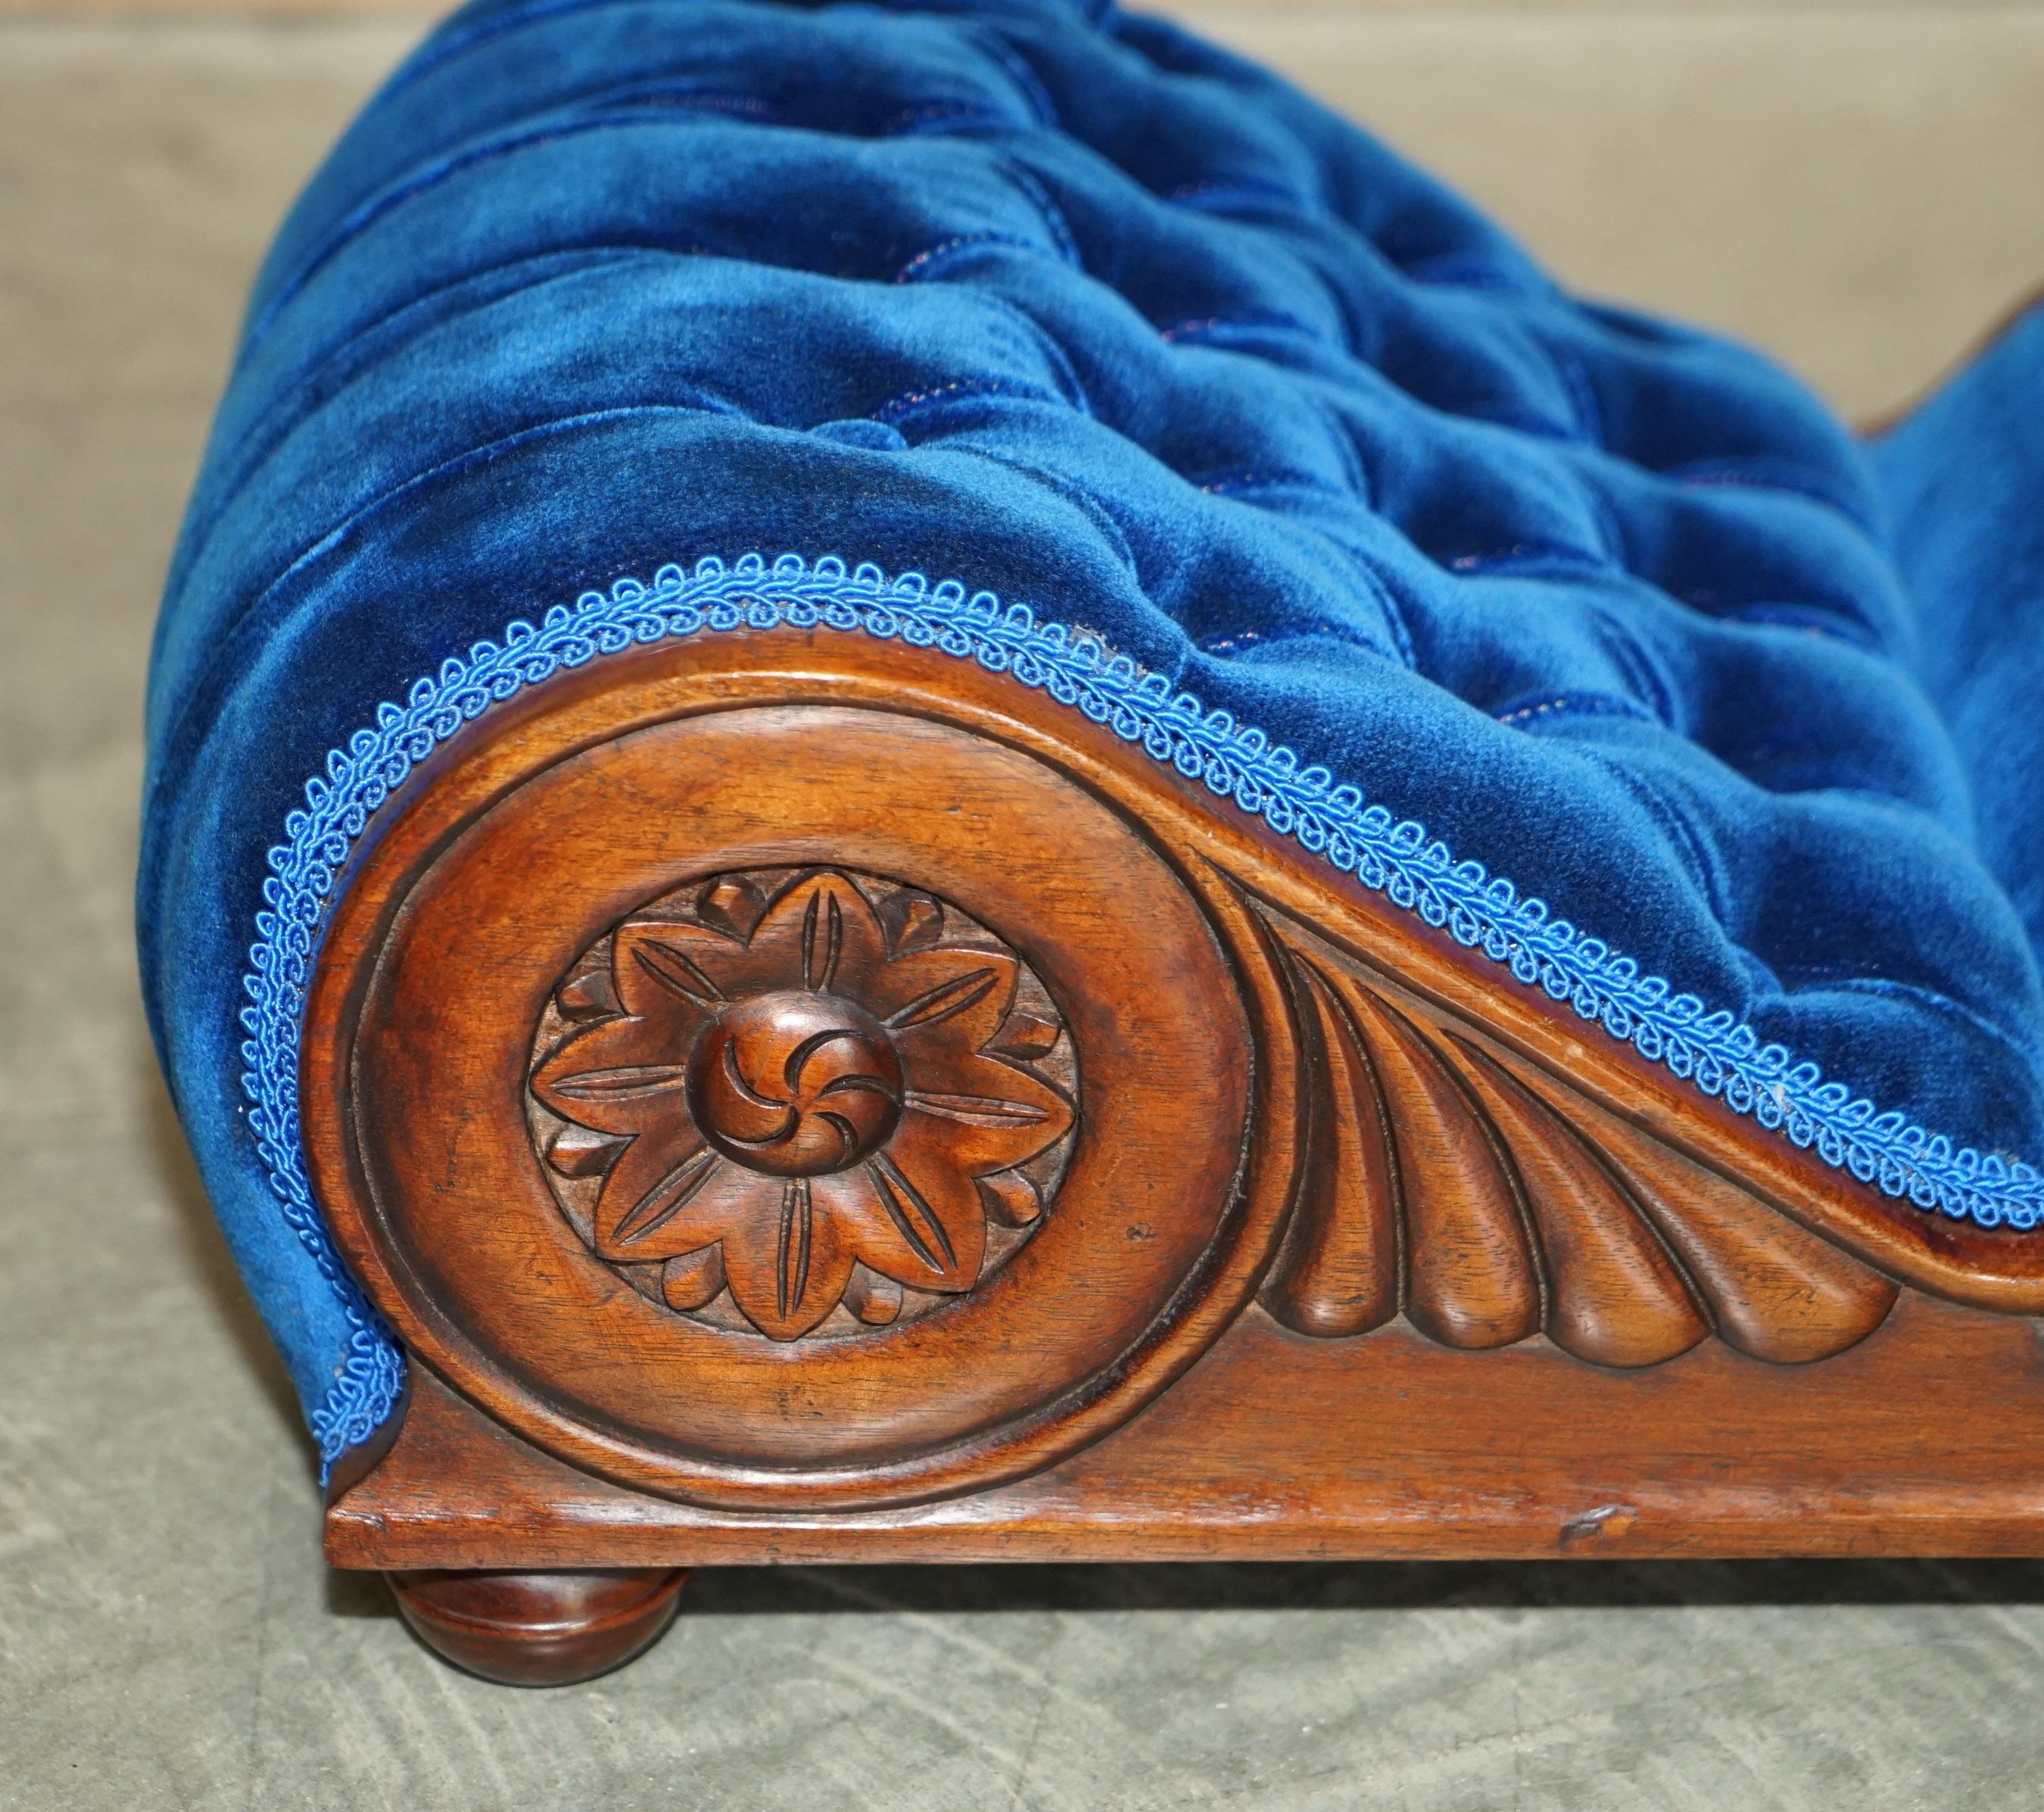 PAIR OF REGENCY BLUE ANTIQUE ViCTORIAN CHESTERFIELD TUFTED CURVED FOOTSTOOLS 2